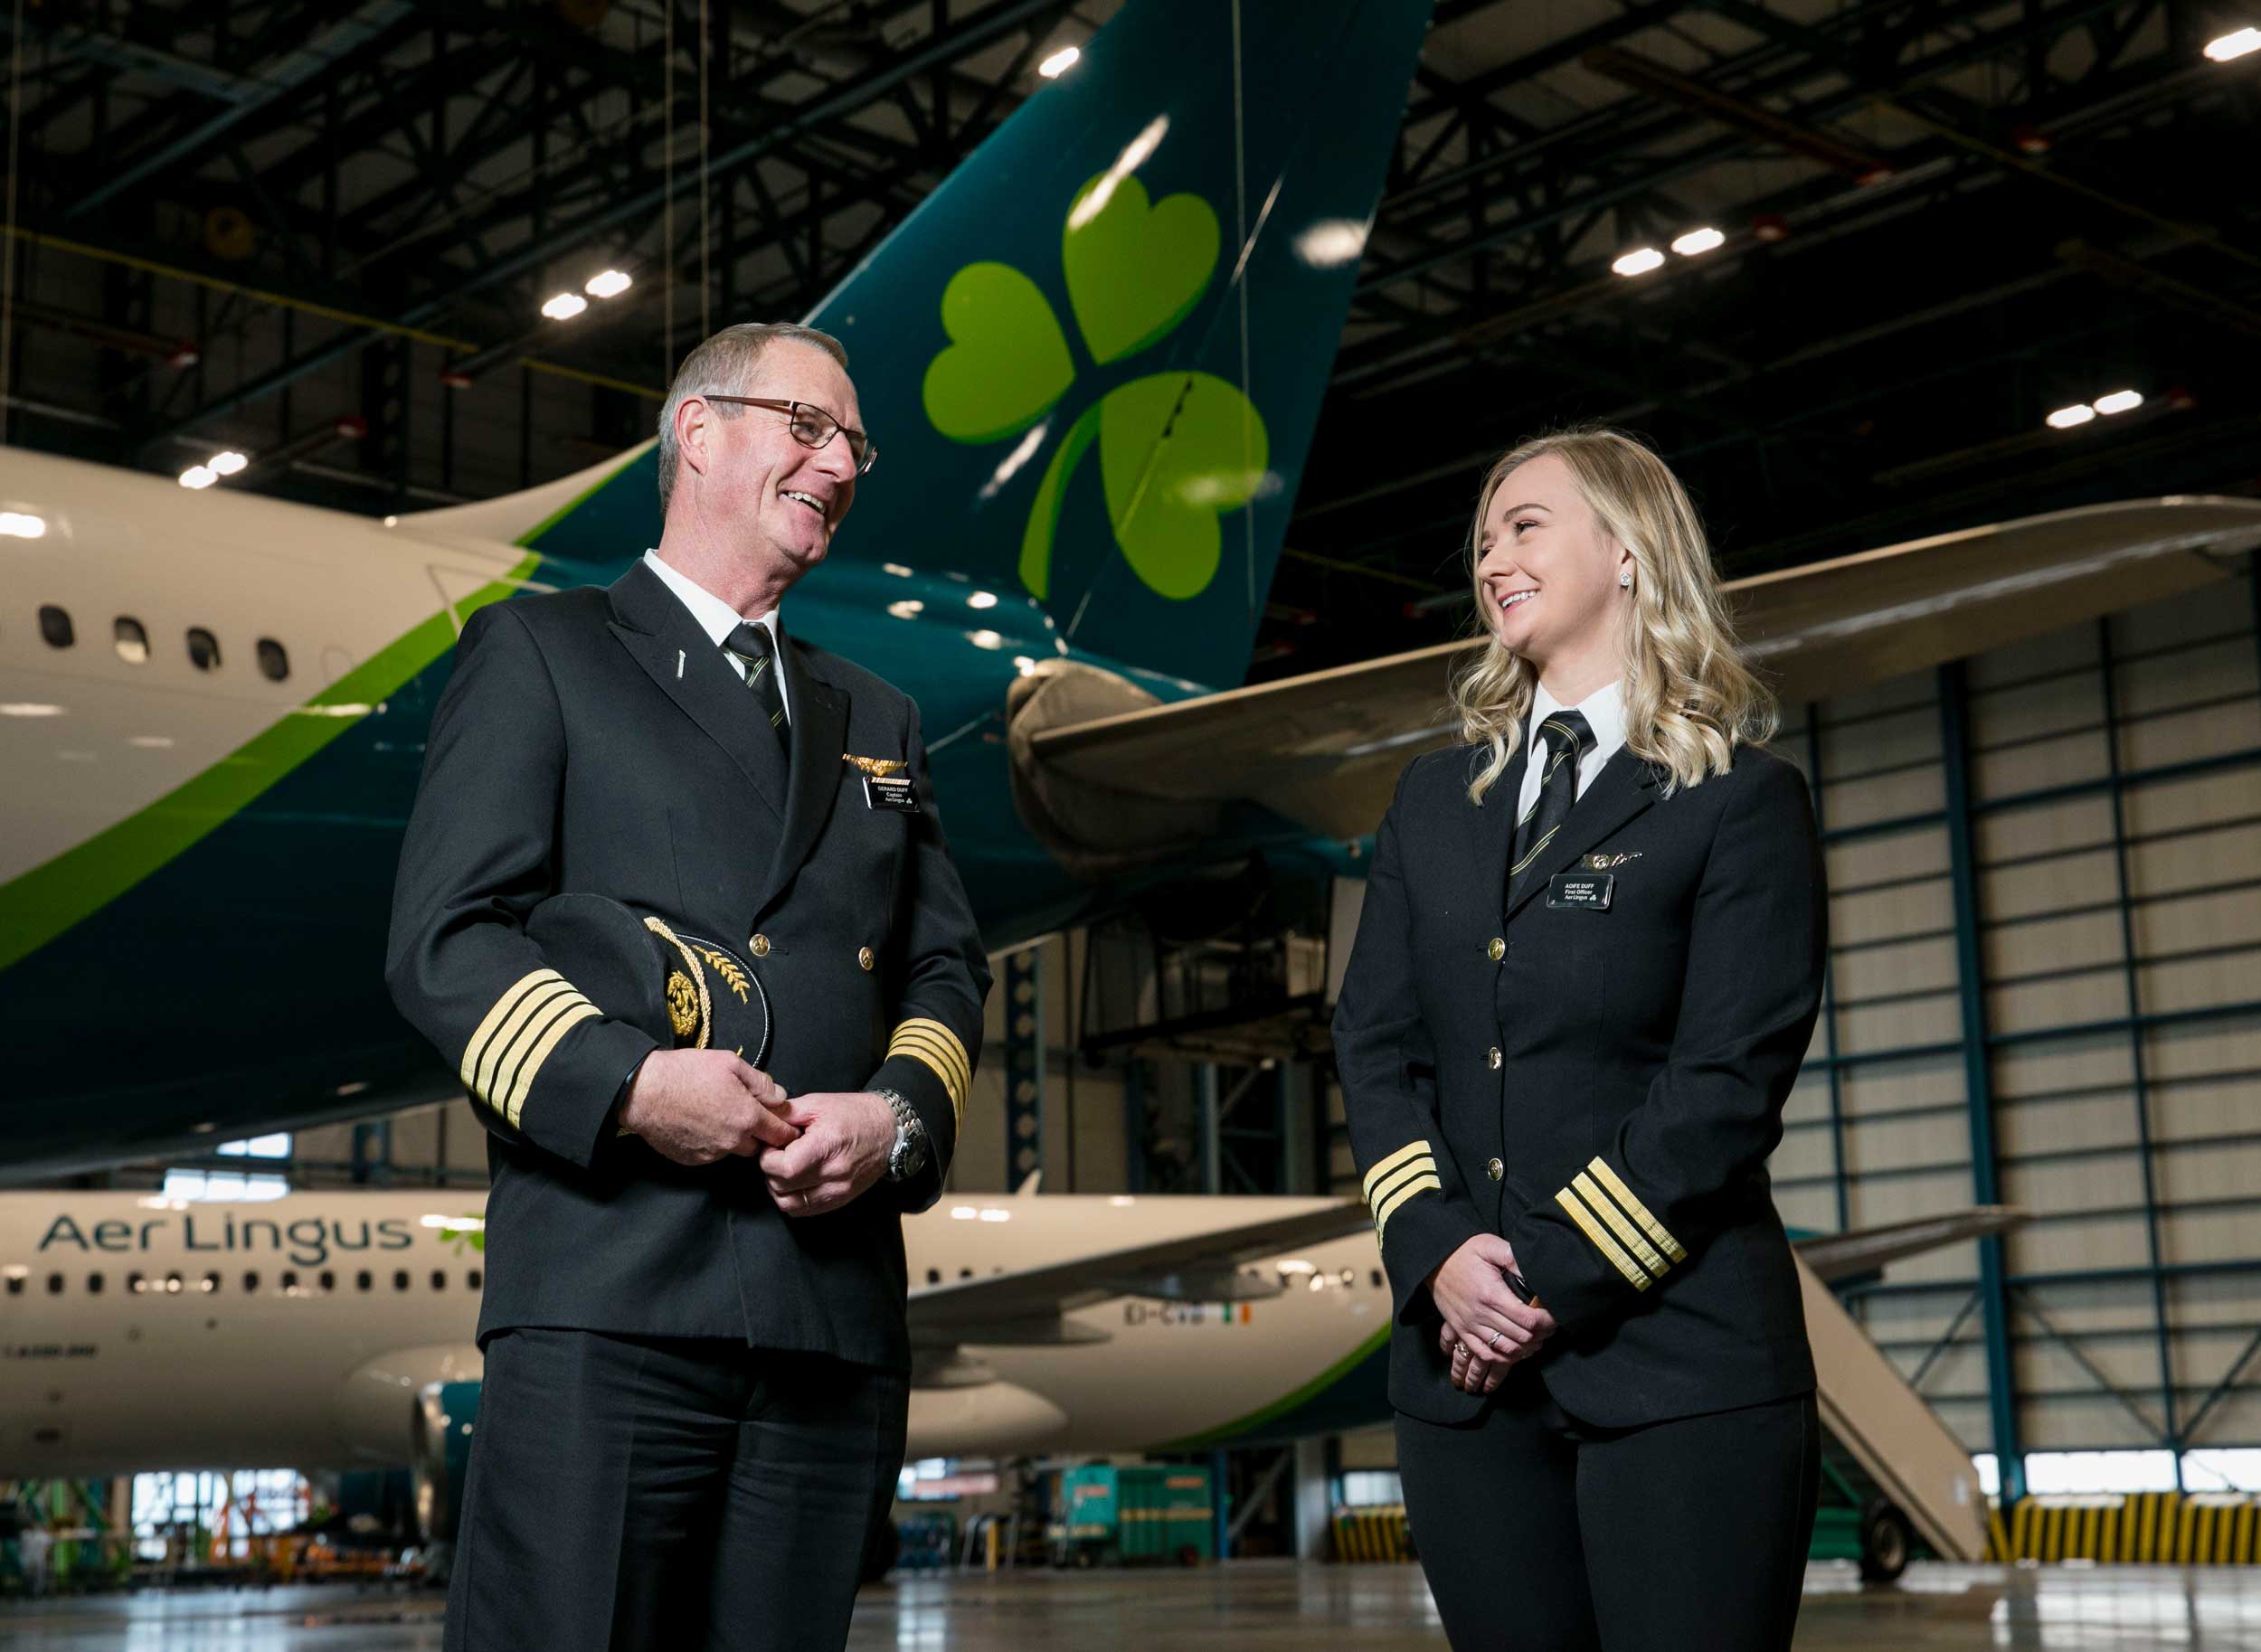 Aer Lingus father daughter pilots